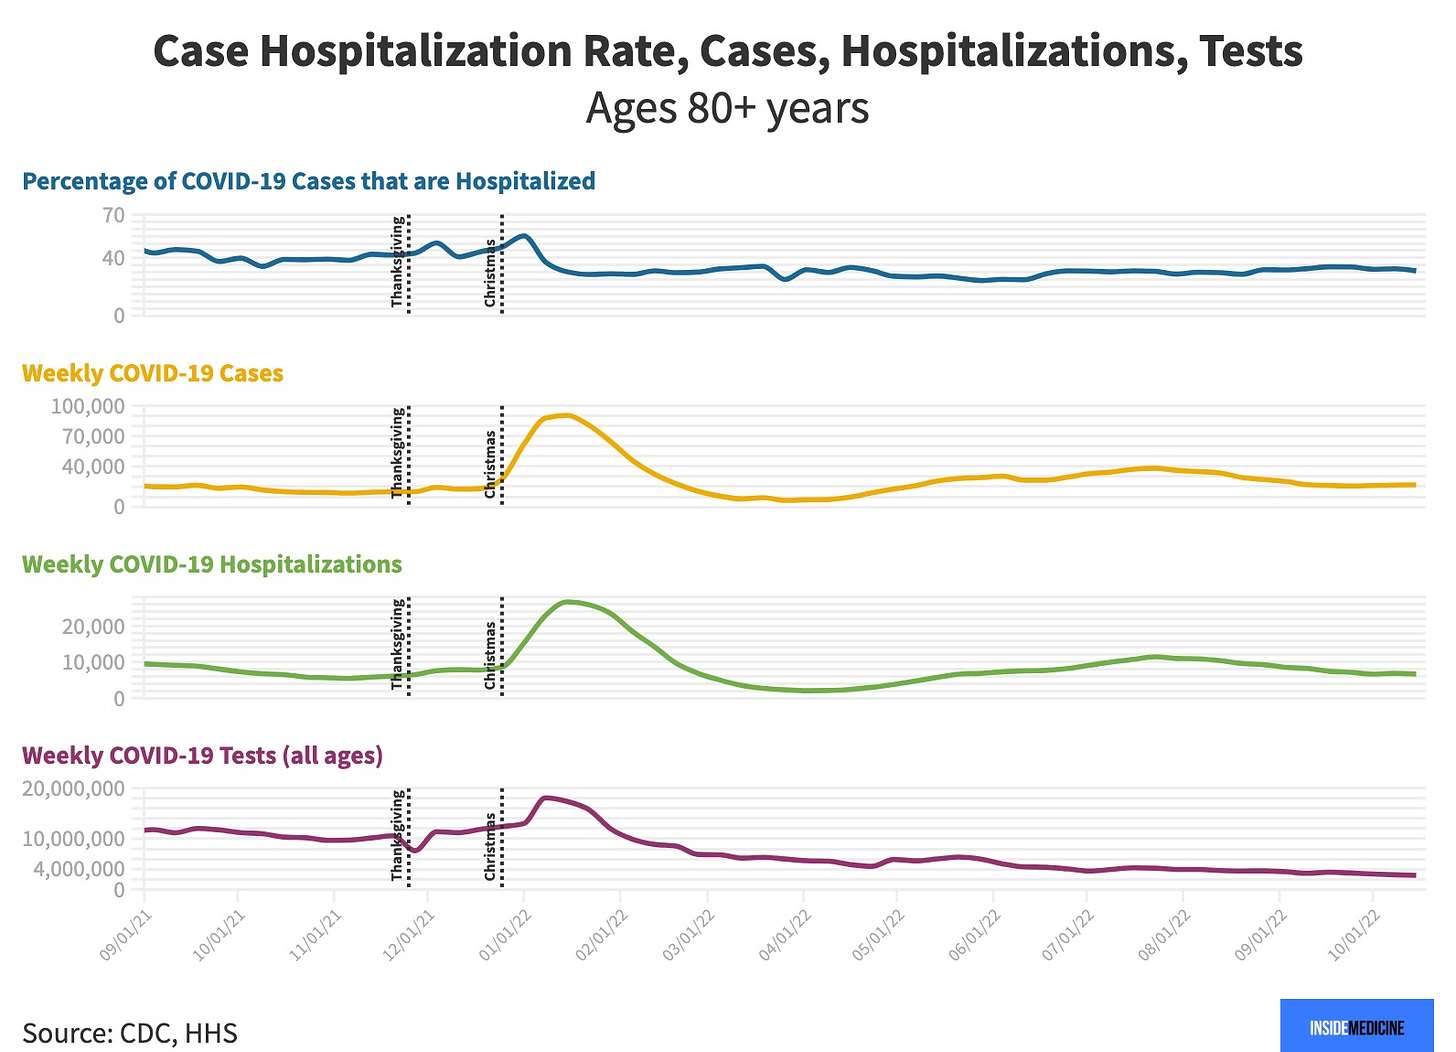 Case hospitalization rates, cases, hospitalizations in people ages 80+